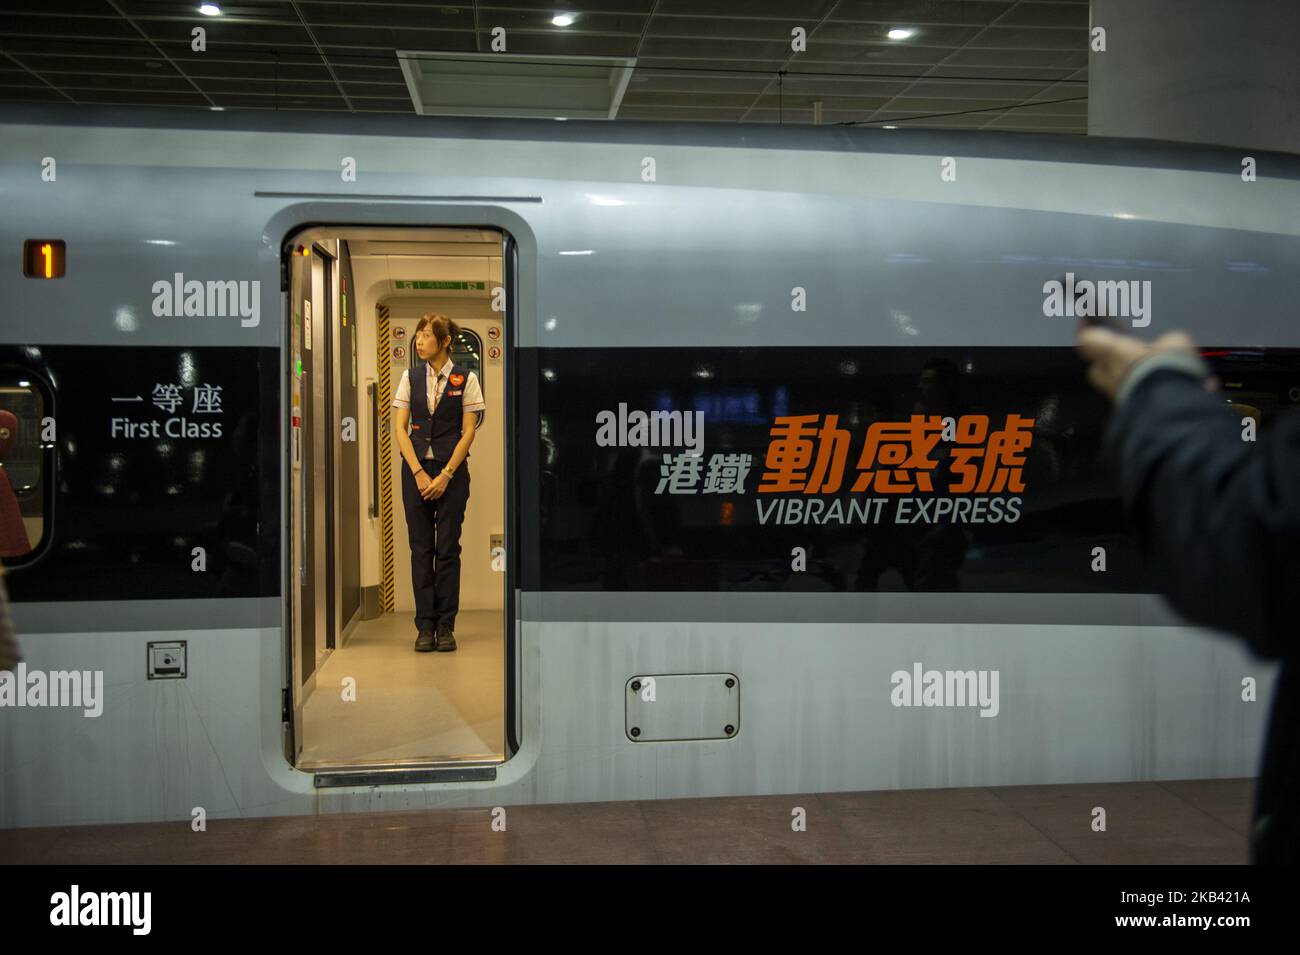 Vibrant Express train, operated by MTR Corp is shown inside Shenzhen North Station in Shenzhen, China. 13 December 2018. Today A Hong Kong court ruled that a controversial arrangement (co-location) which allows mainland Chinese officers to apply national laws at the city’s new cross-border rail terminus is legally sound, The Guangzhou-Shenzhen-Hong Kong Express Rail Link (XLR) which cost (US$10.8 billion ) went into operation on September 23.early this year. (Photo by Harry Wai/NurPhoto) Stock Photo